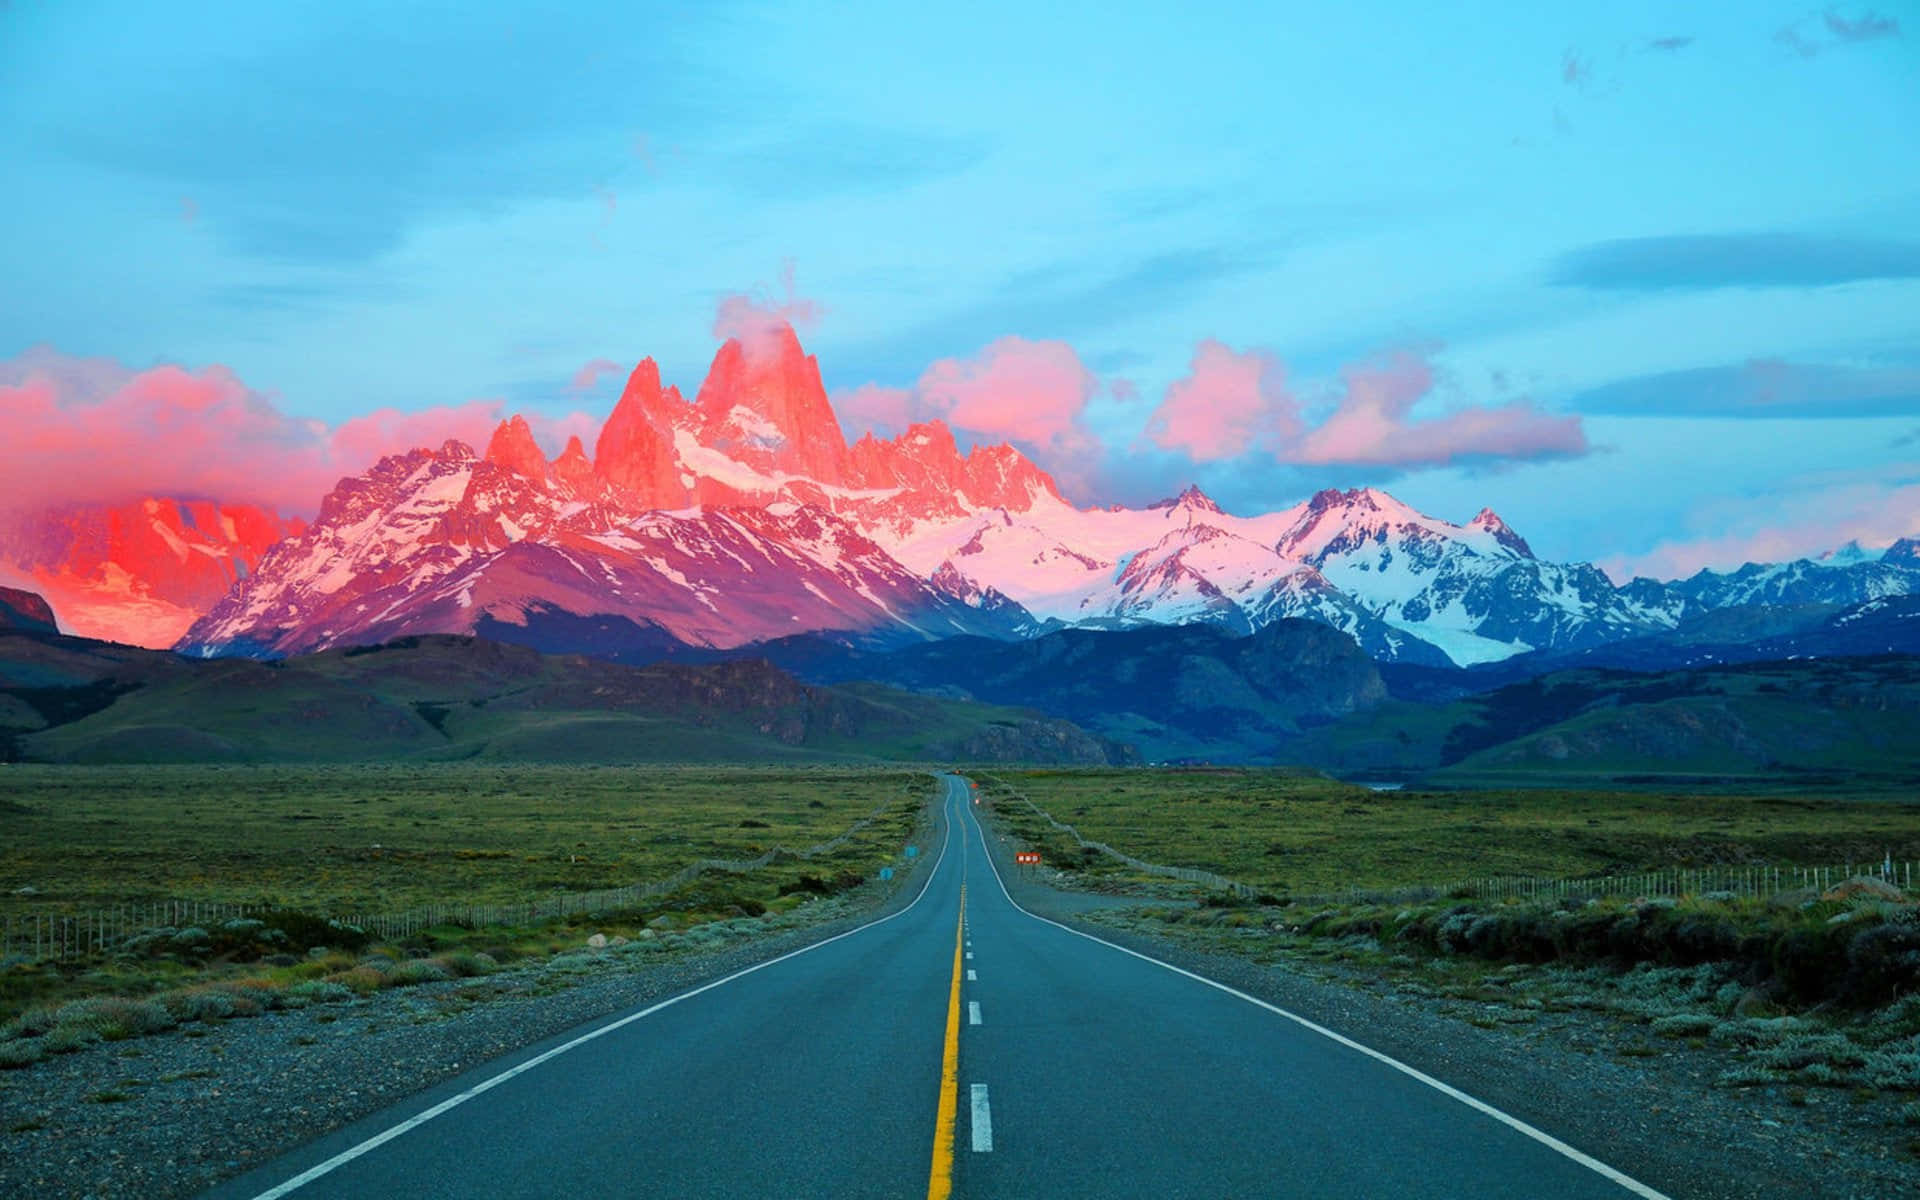 Take in the tranquility of Patagonia while exploring the great outdoors